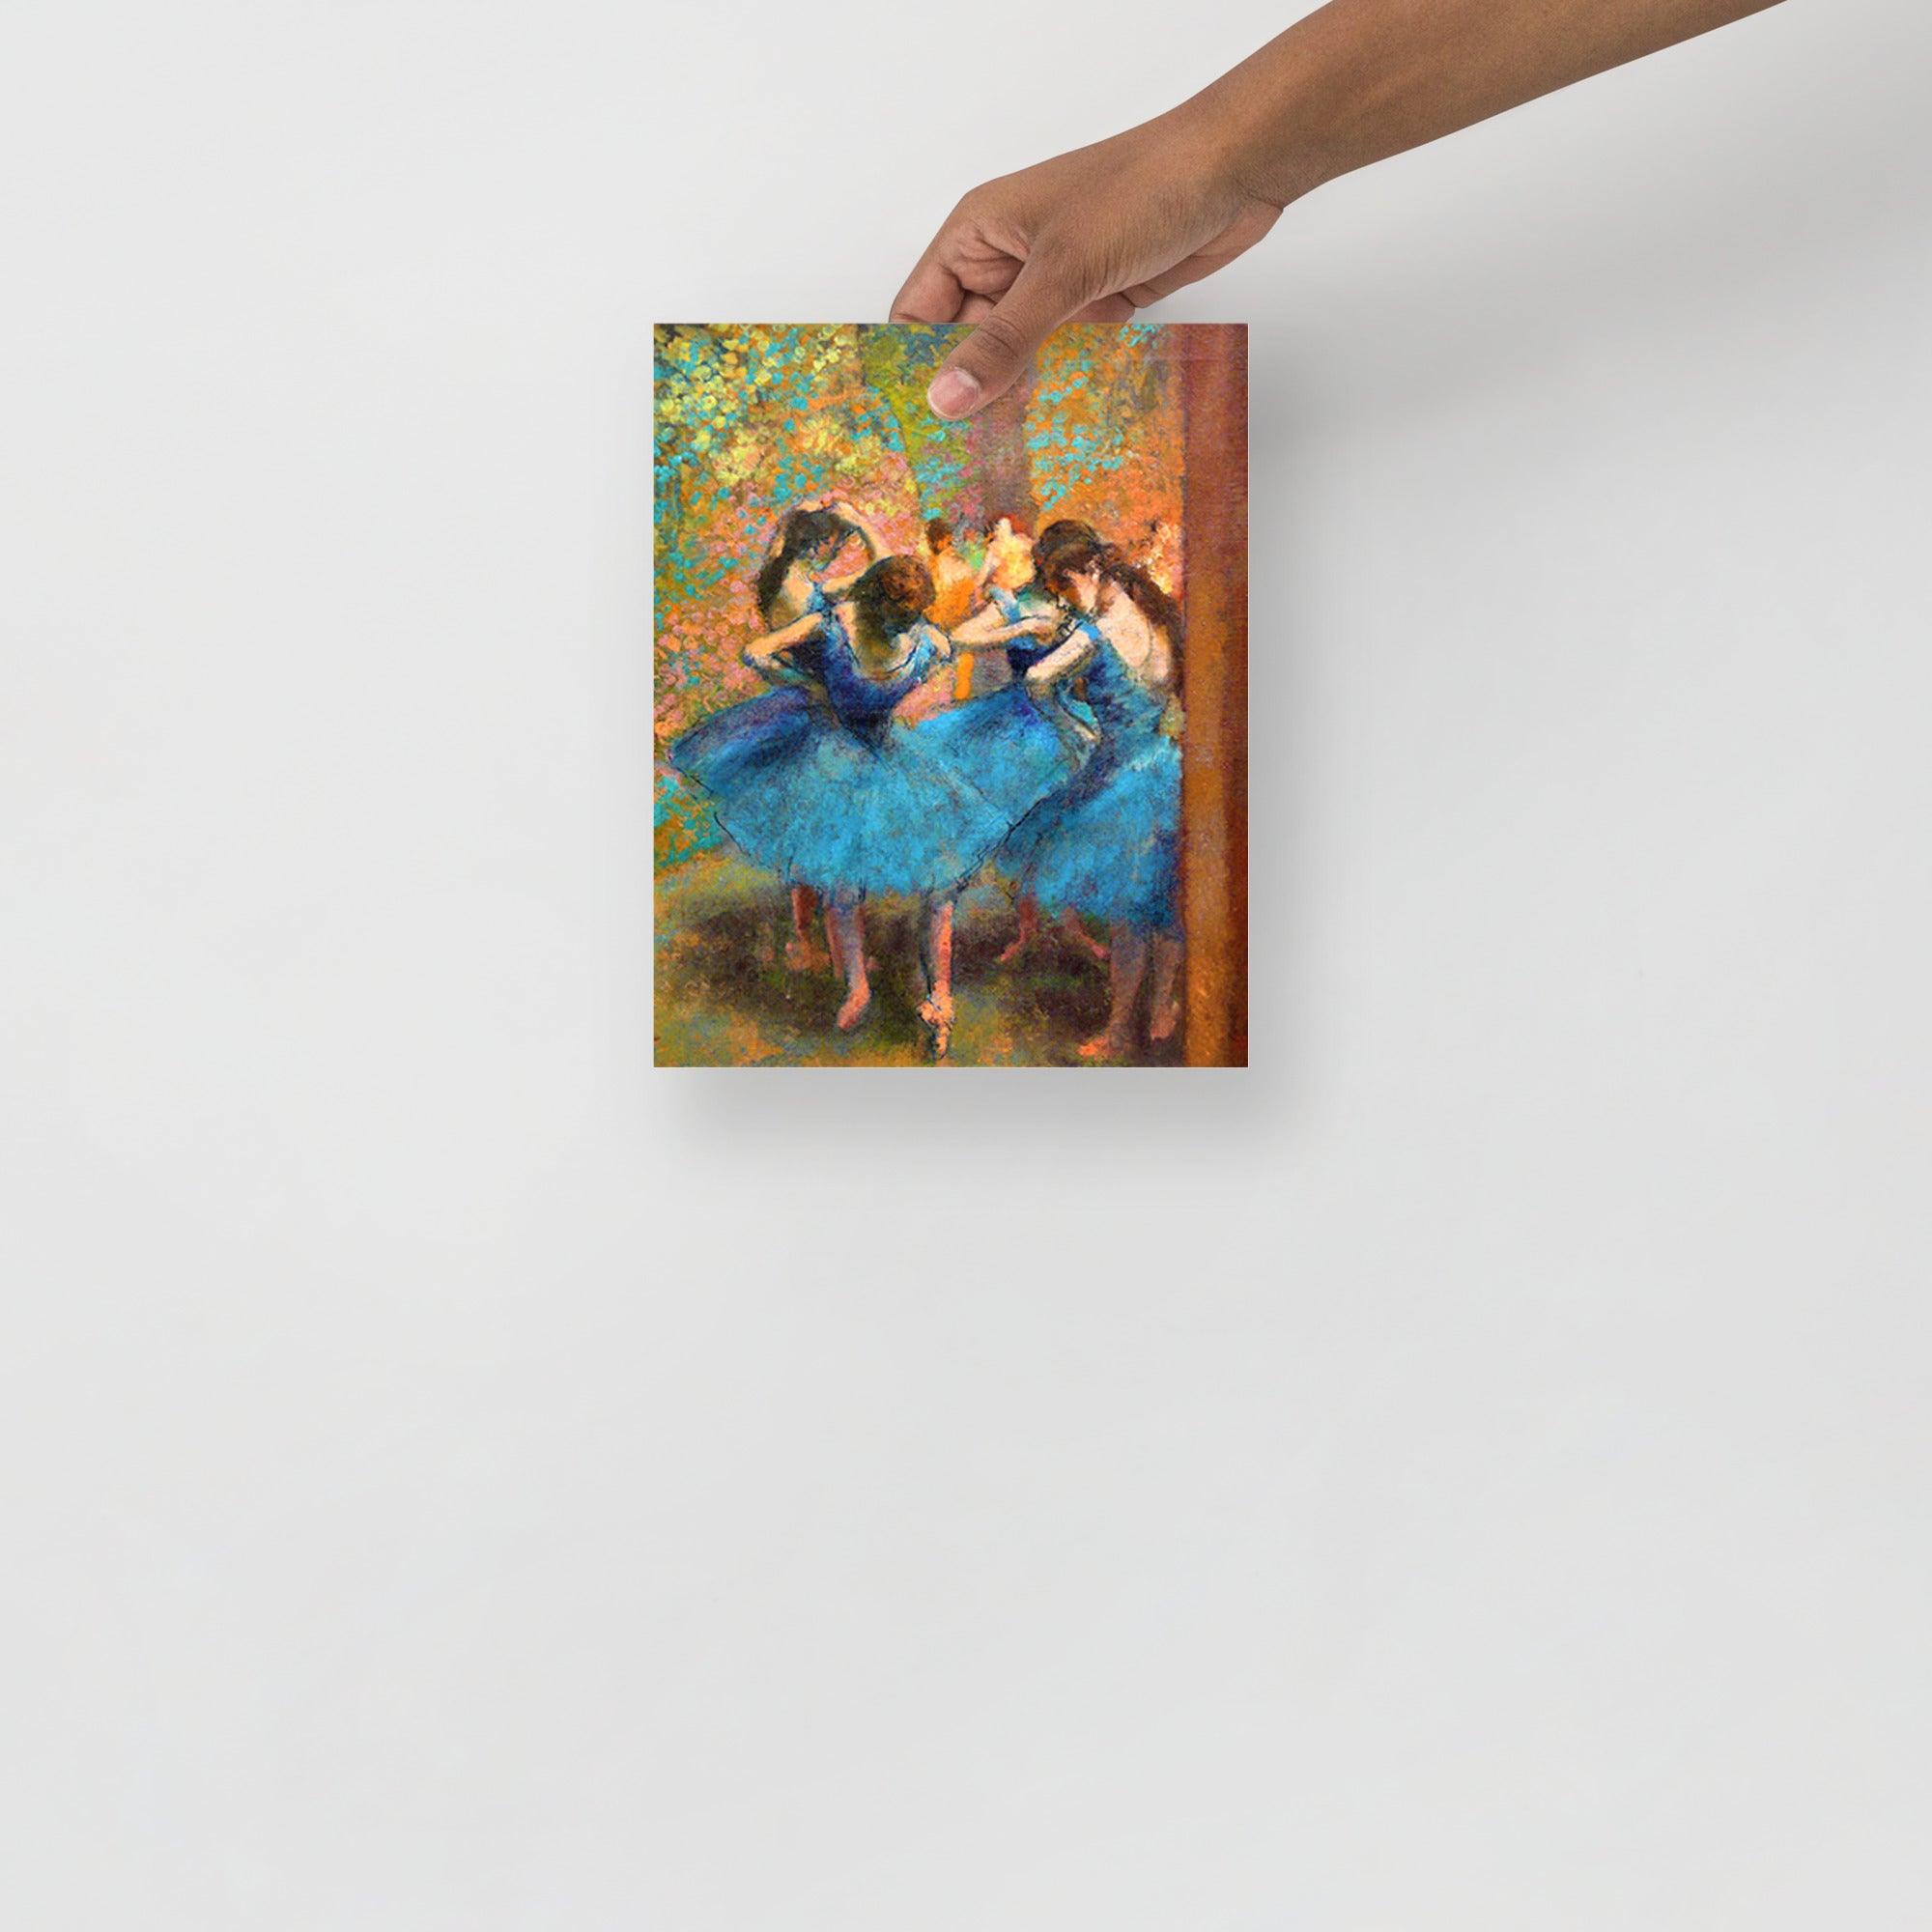 A Dancers in Blue by Edgar Degas poster on a plain backdrop in size 8x10”.